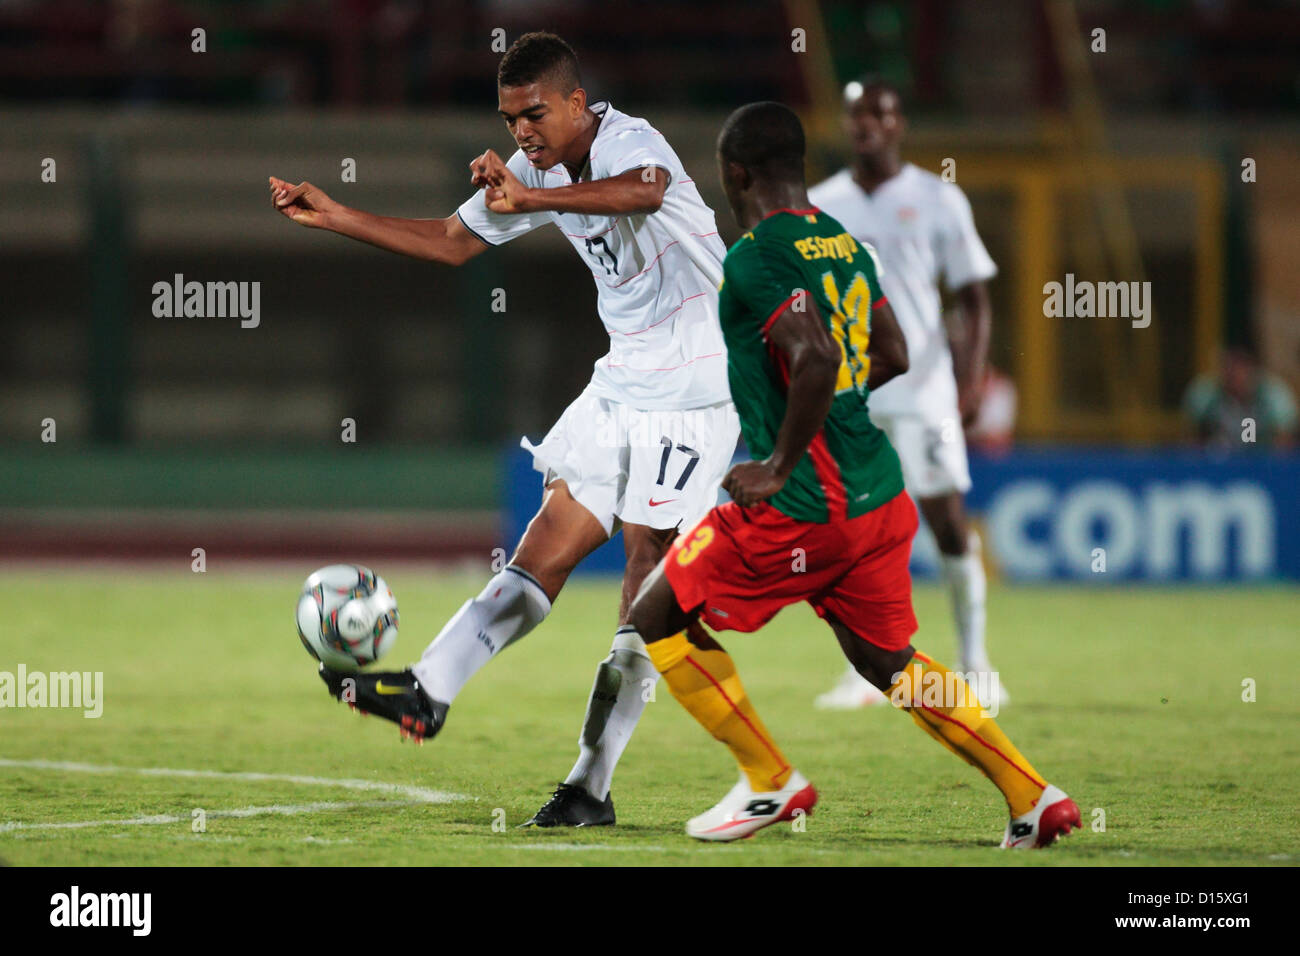 Bryan Arguez of the United States (17) kicks the ball during the 2009 FIFA U-20 World Cup Group C match against Cameroon. Stock Photo